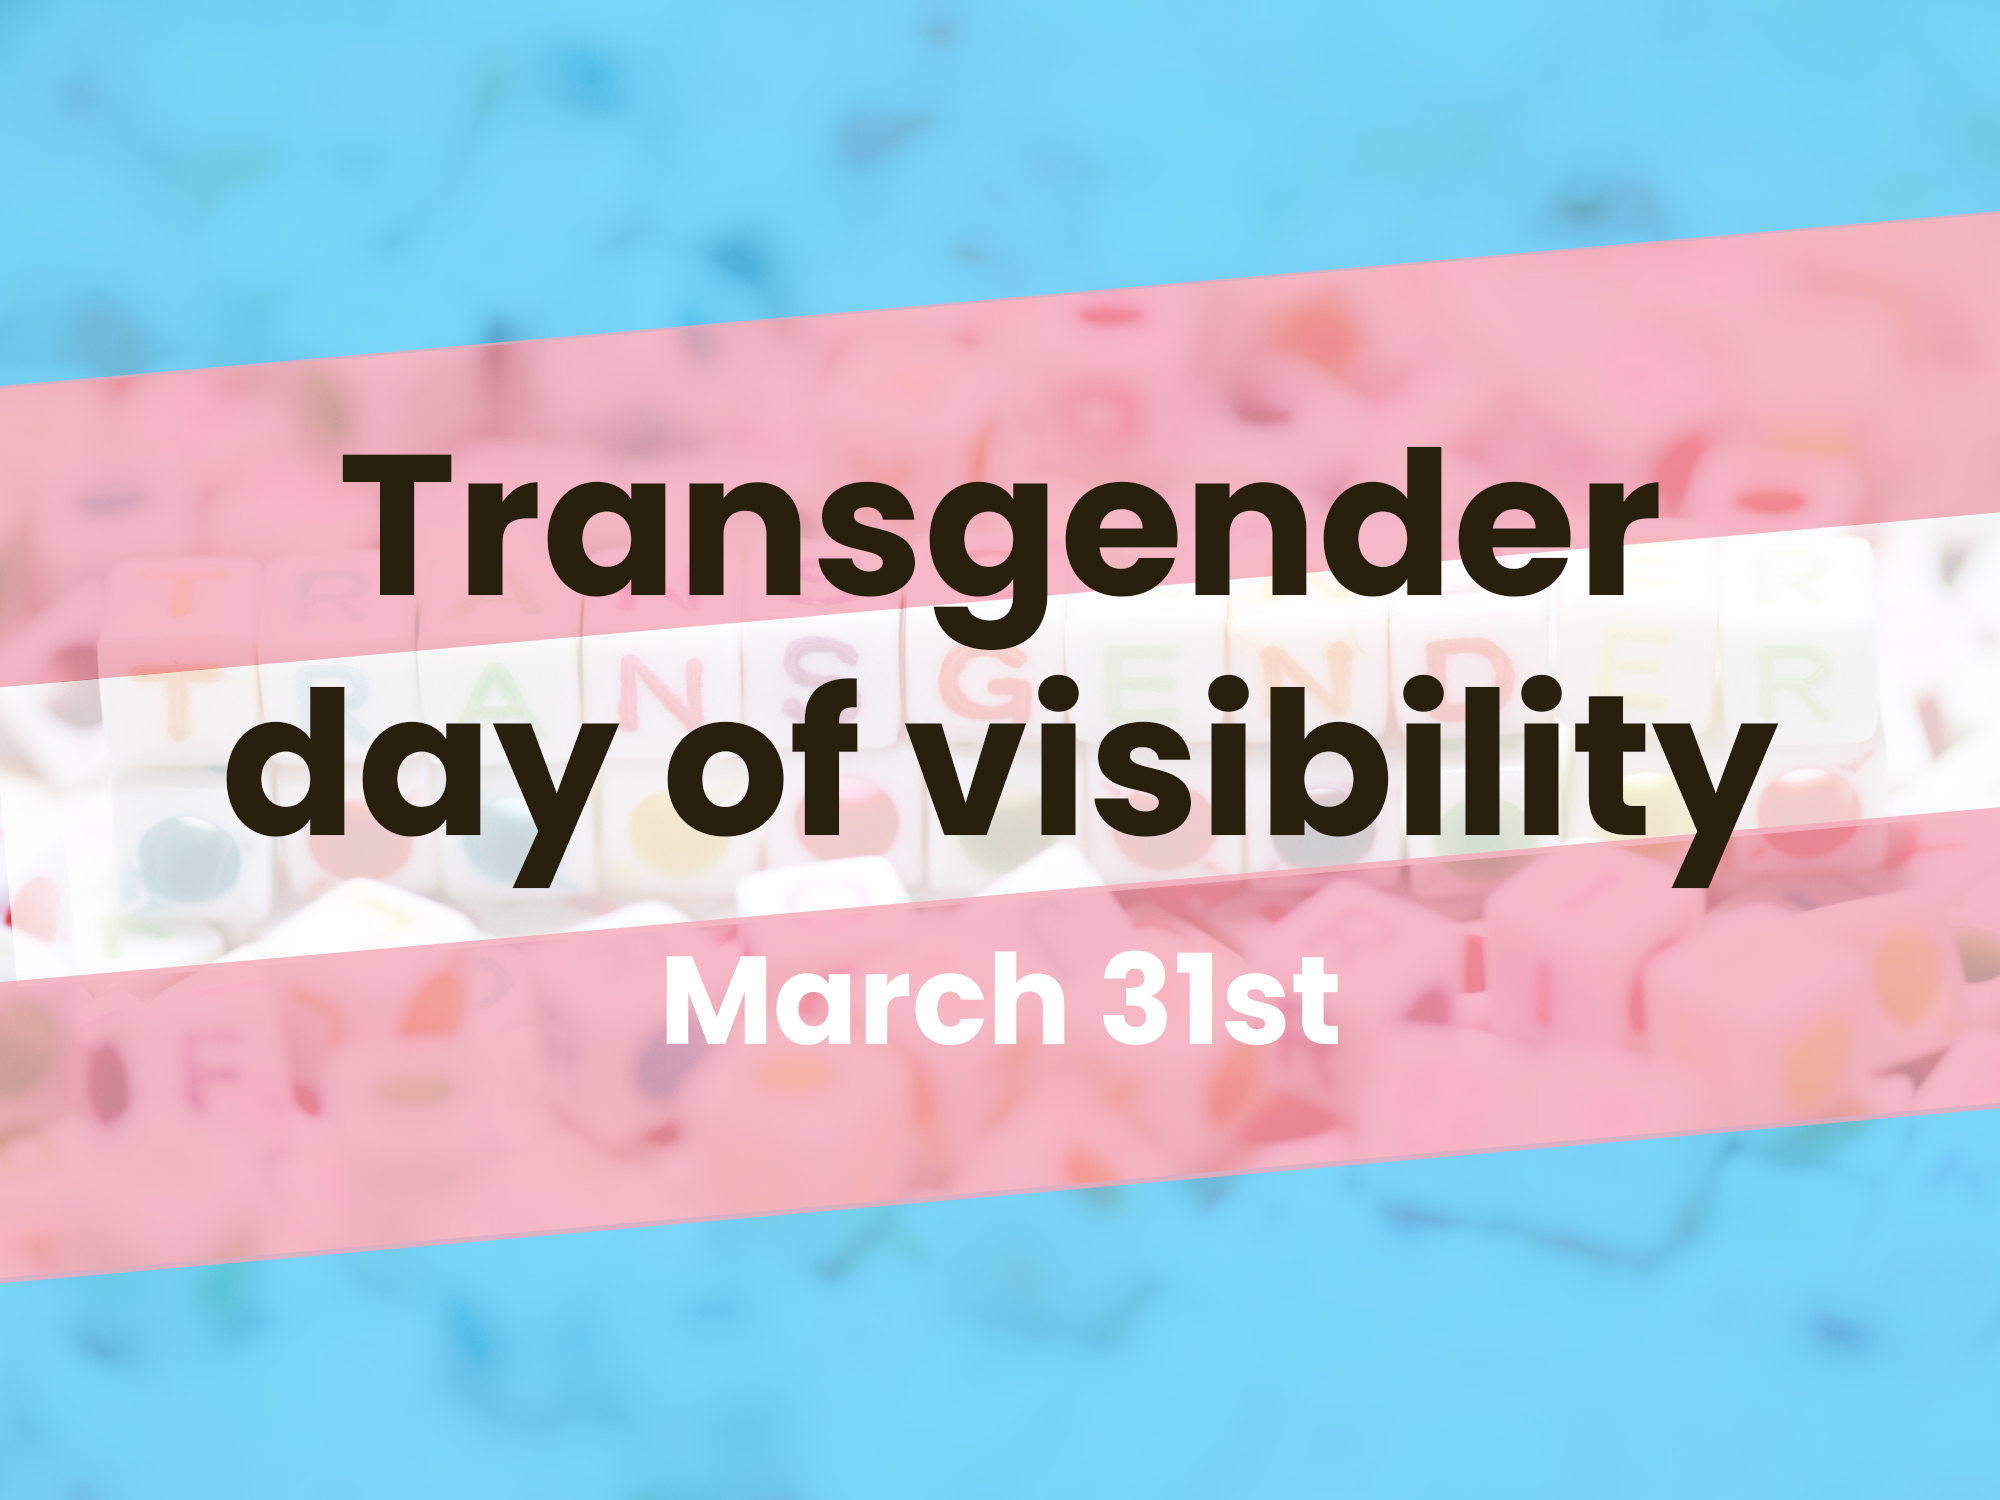 Montreal Careers - Why international day of trans visibility is important